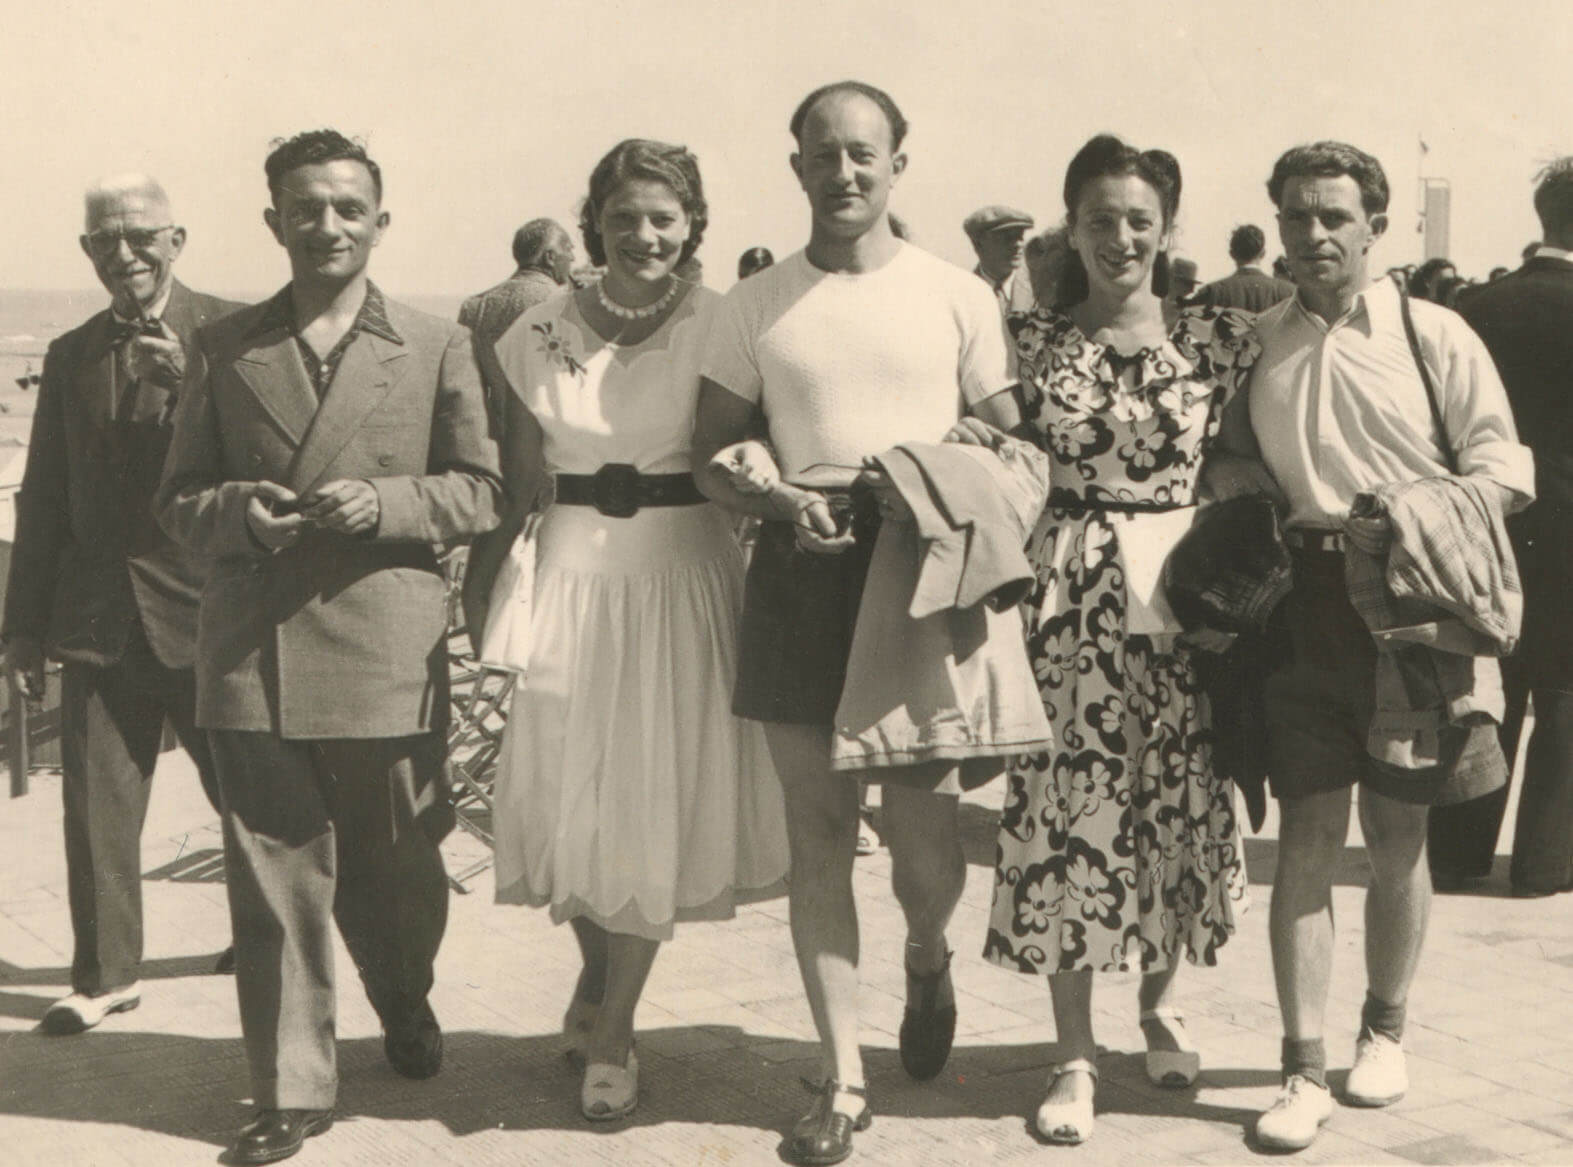 The author's mother and father (at right) on the Belgian shore.